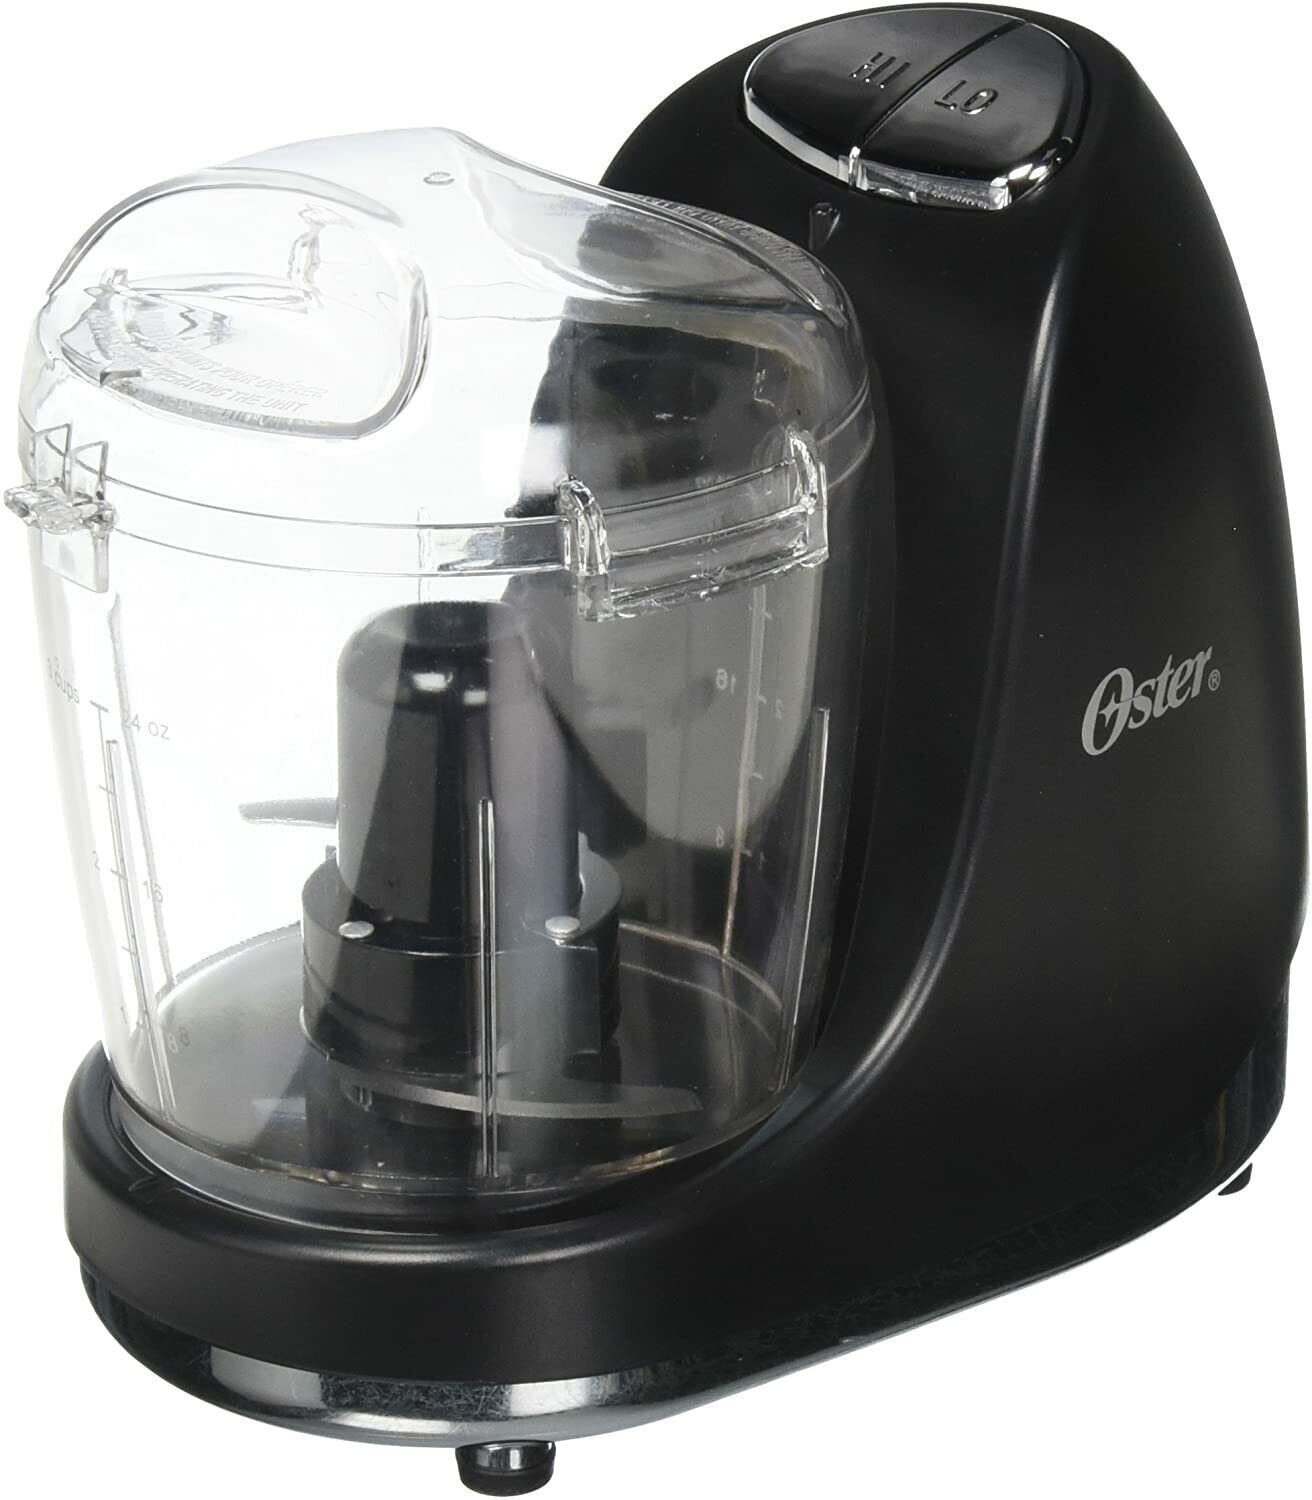 Oster 3320-051 Mini Food Chopper Processor 220 Volts Export Only Not for USA - $91.99